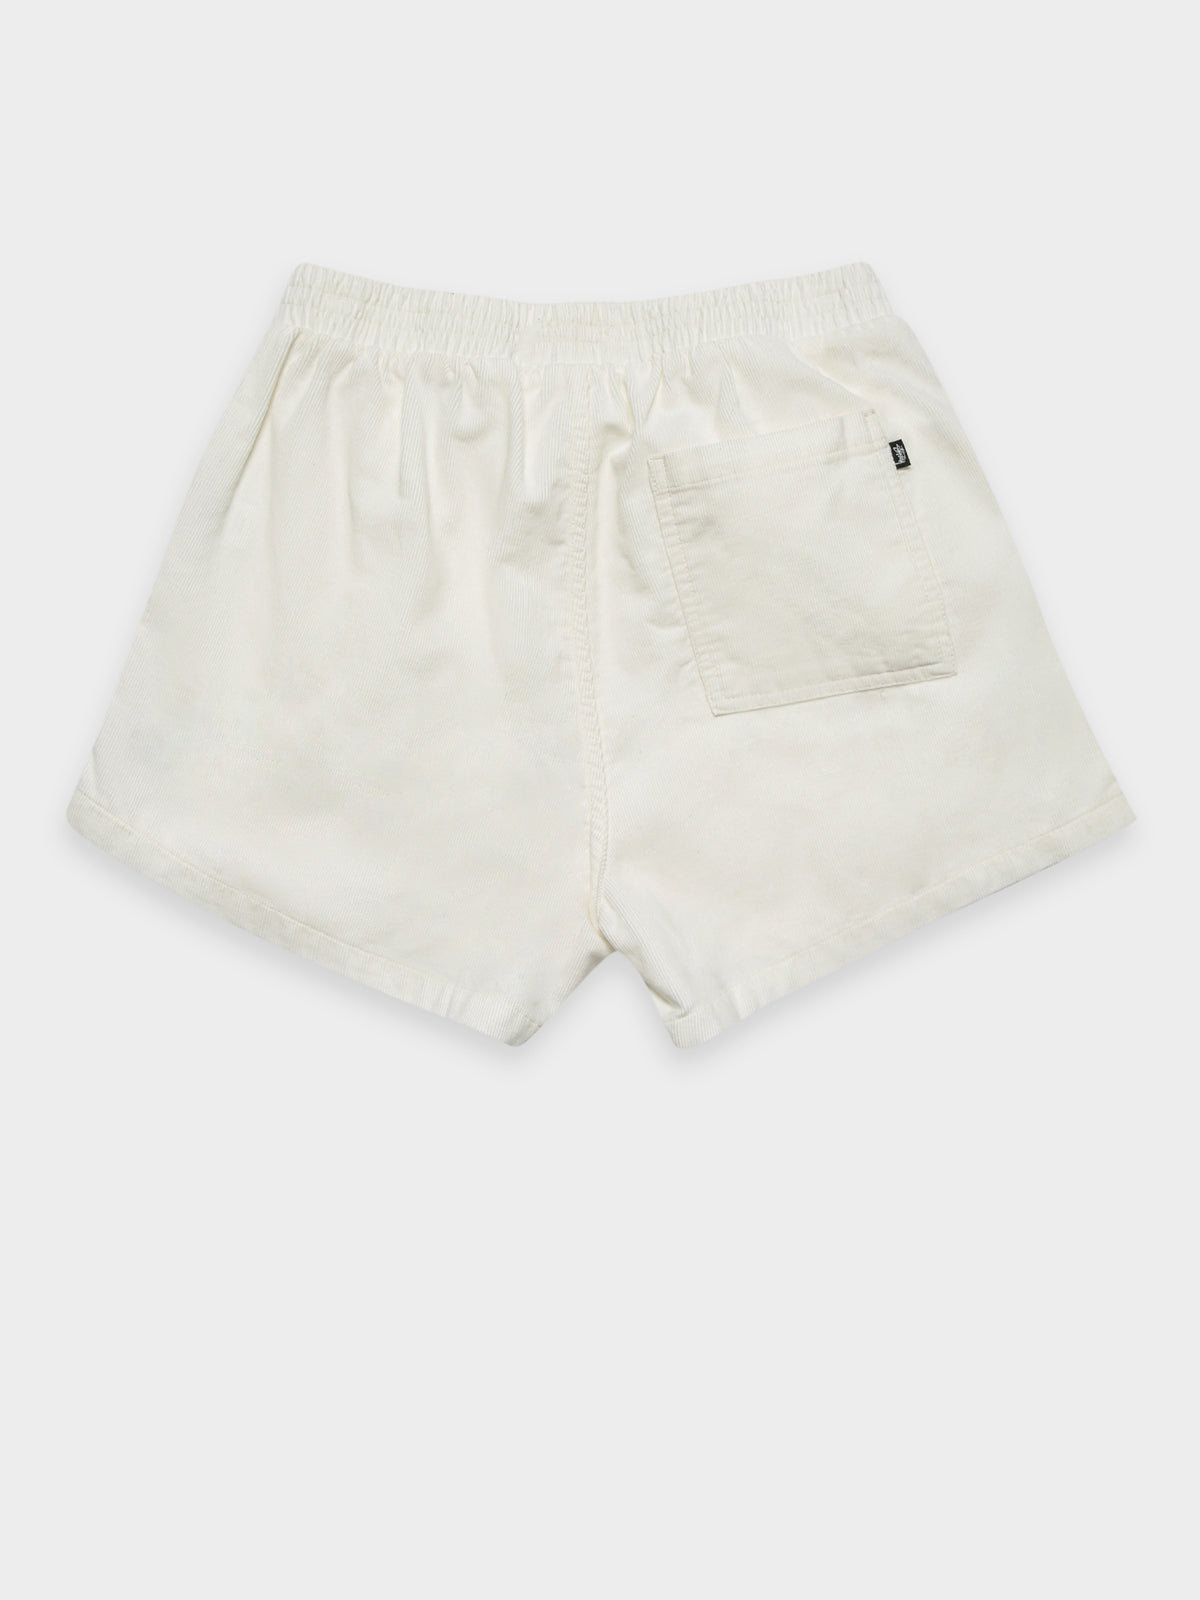 Stock Cord Shorts in White